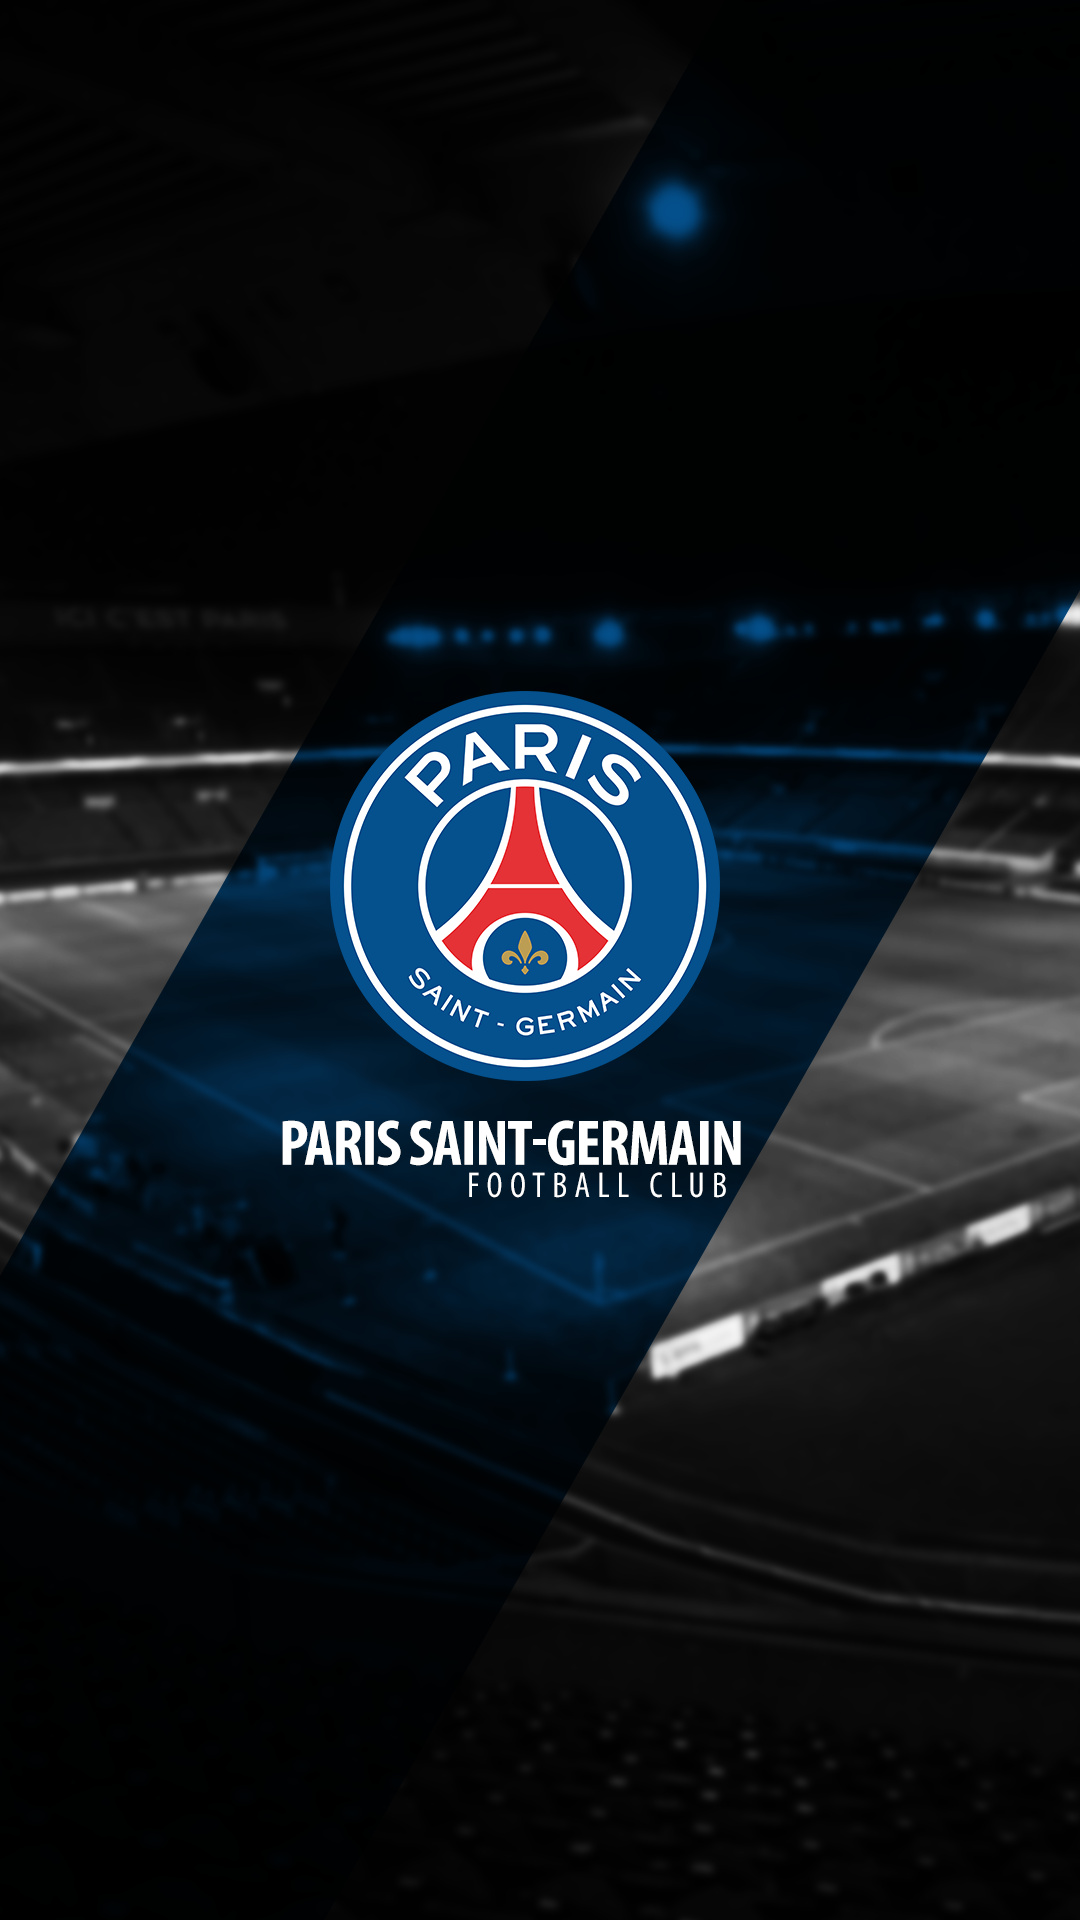 Paris Saint-Germain: The most successful French soccer club in history. 1080x1920 Full HD Wallpaper.